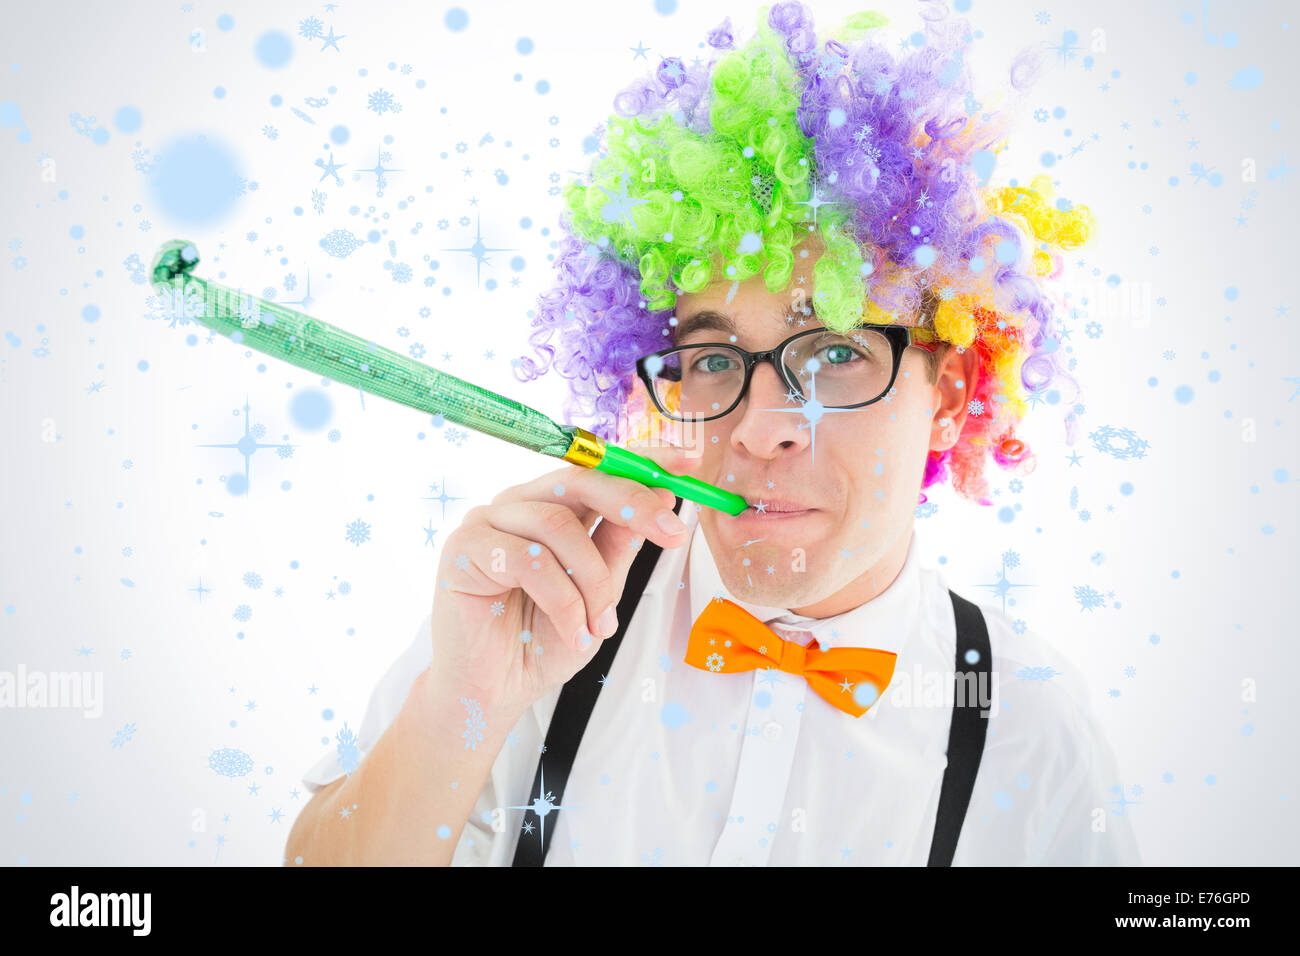 Composite image of geeky hipster wearing a rainbow wig blowing party horn Stock Photo